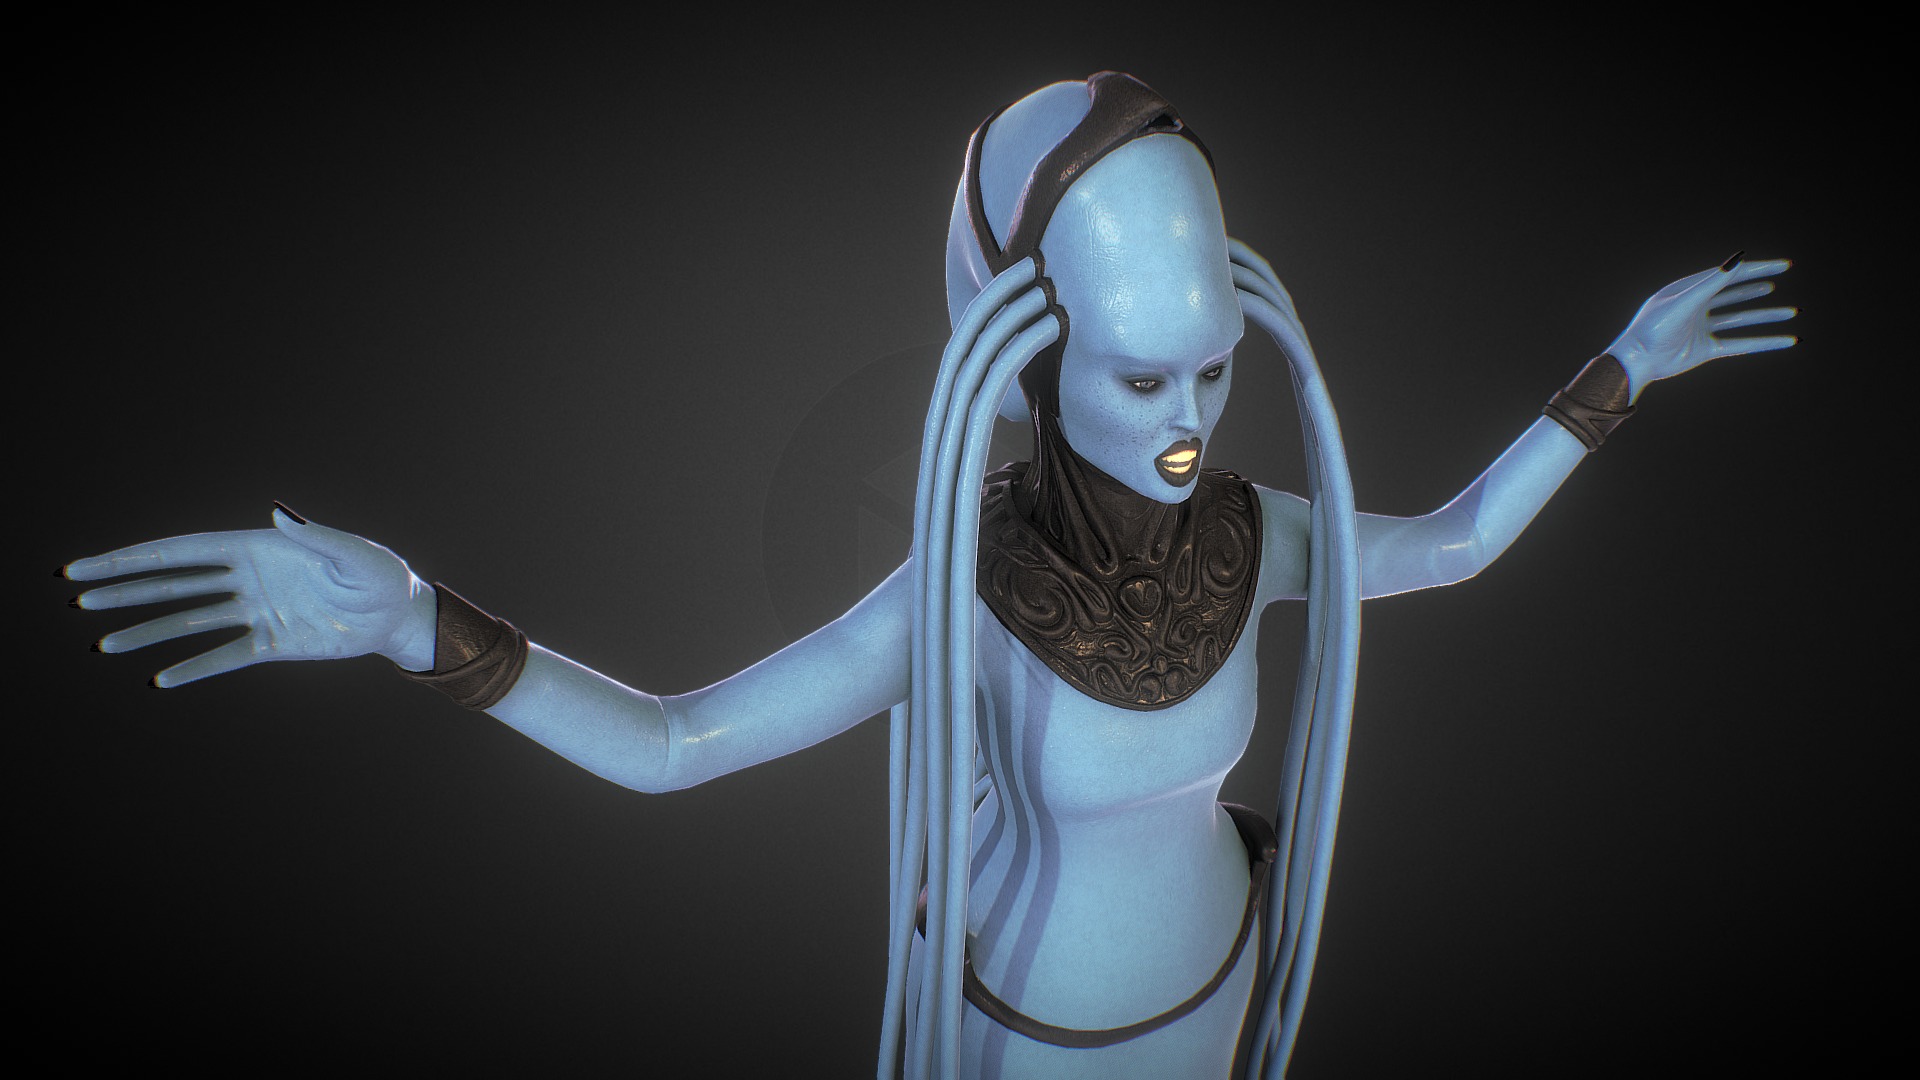 3D model Diva Plavalaguna - This is a 3D model of the Diva Plavalaguna. The 3D model is about a person in a garment.